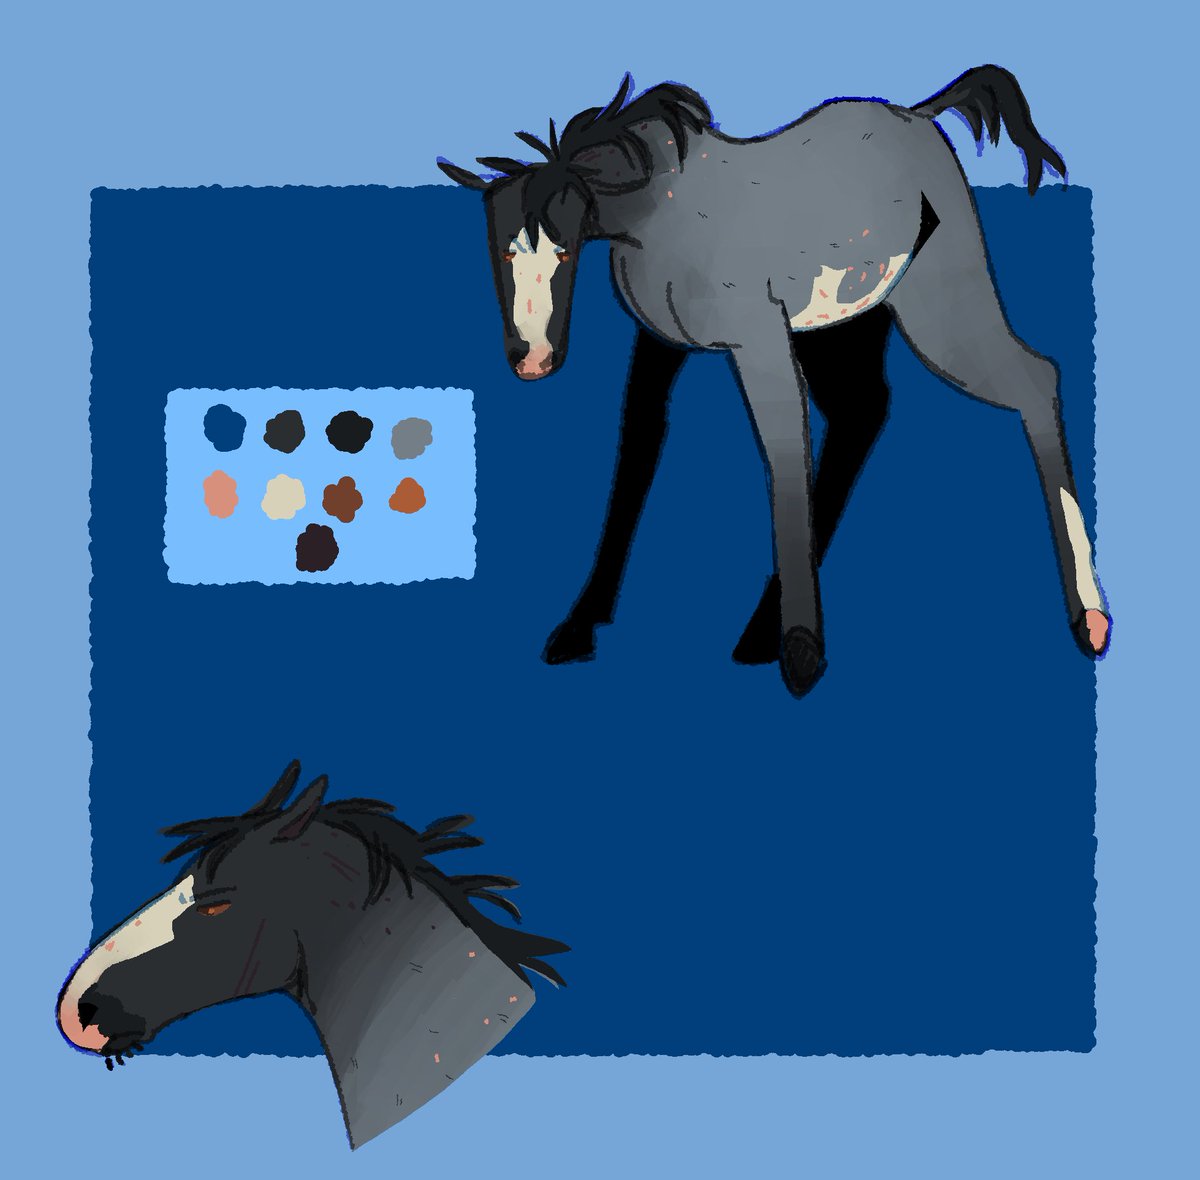 honse
an old blue roan sabino tb who developed swayback (not painful for him) with age. has nics and scars from fights with other horses since hes a temperamental feller #oc #ocart #horse #thoroughbred #blueroan #sabino #ibispaint